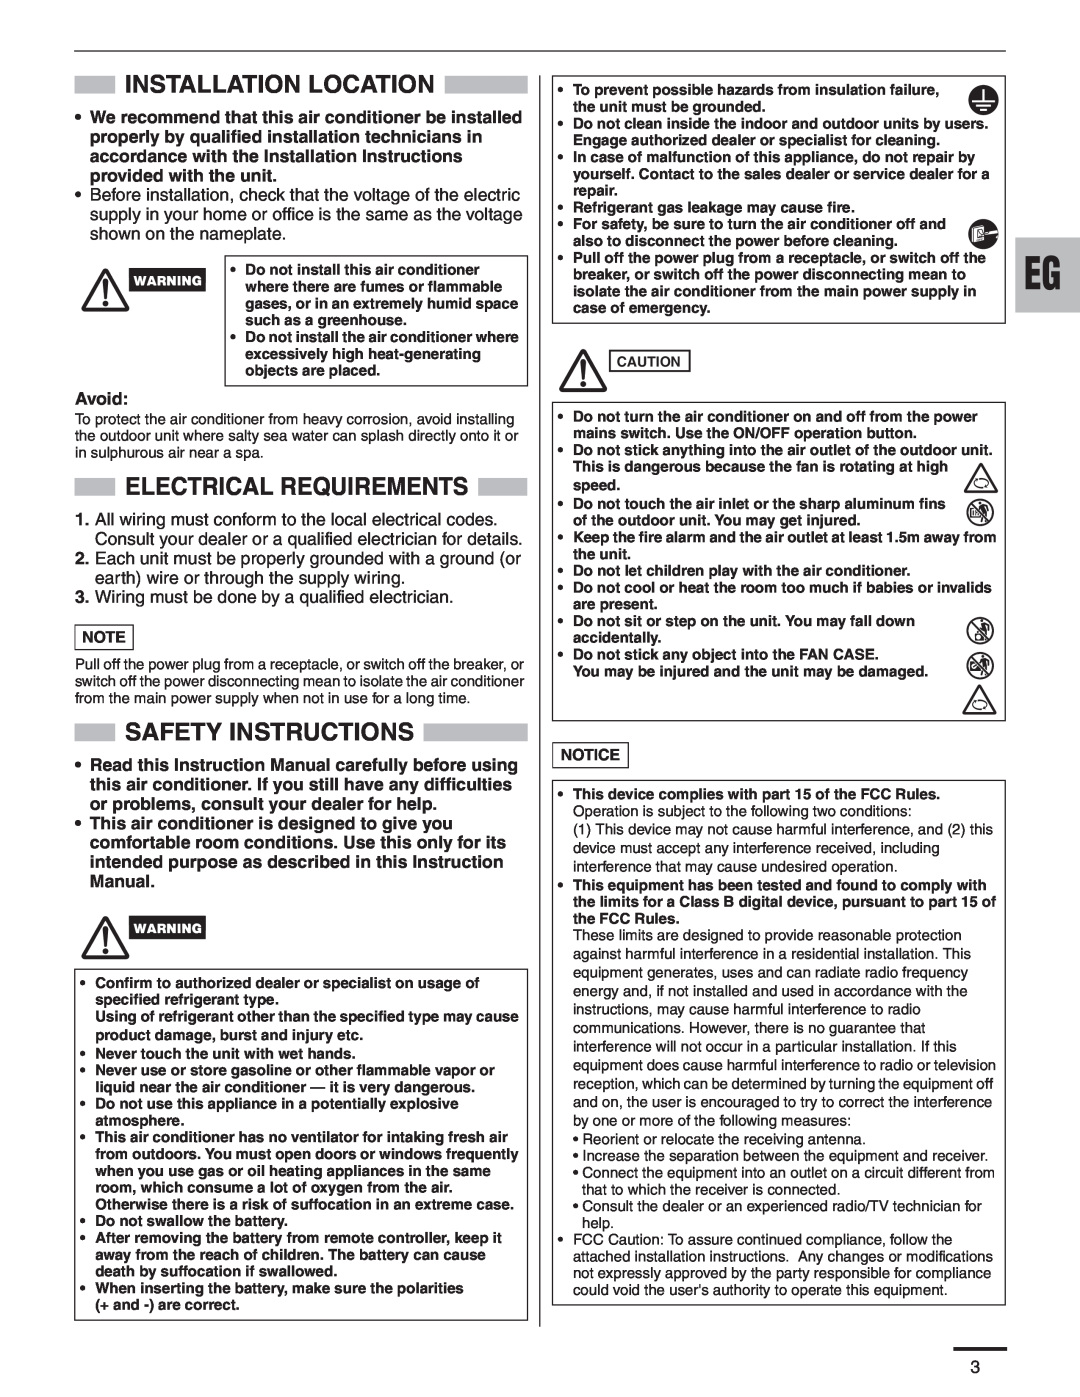 Panasonic R410A service manual Installation Location, Electrical Requirements, Safety Instructions, Avoid 